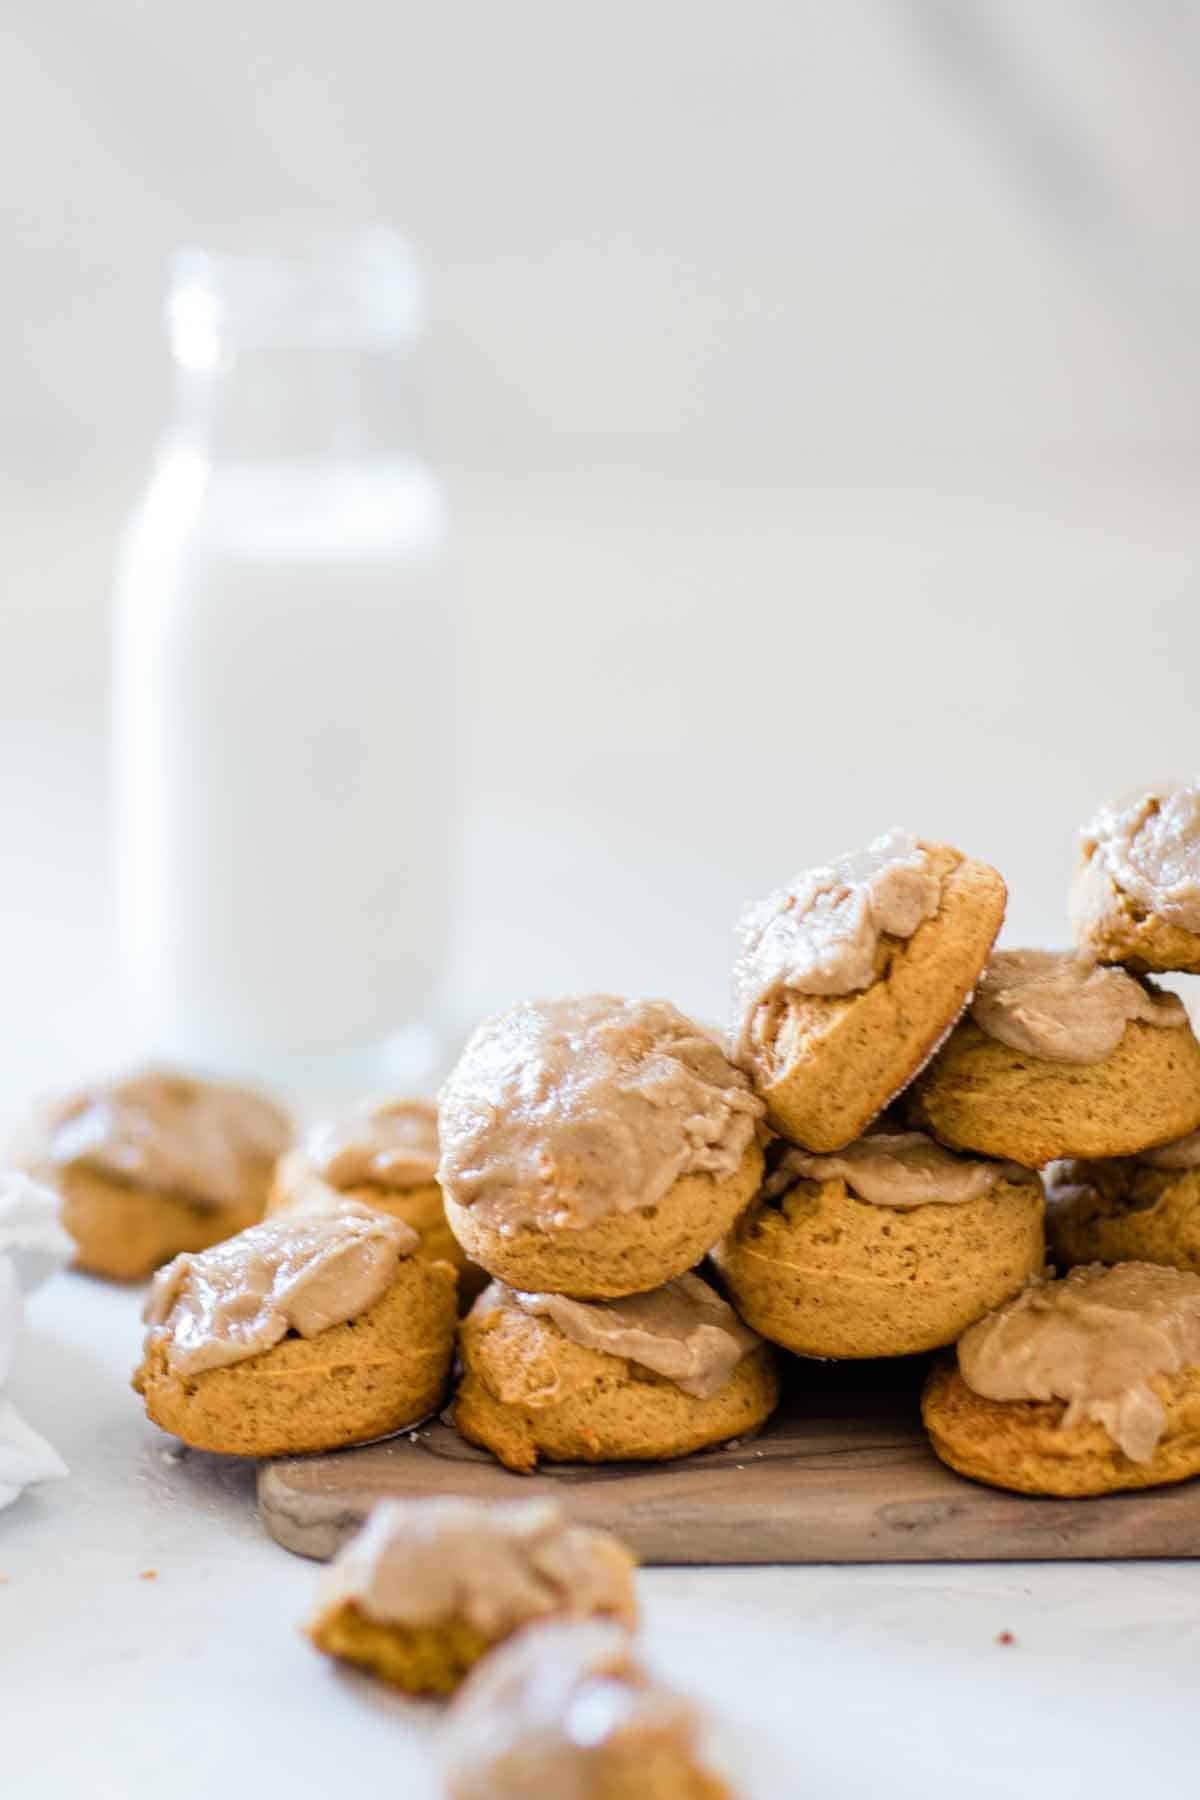 Soft pumpkin cookies on a wooden board. There is a bottle of milk in the background.